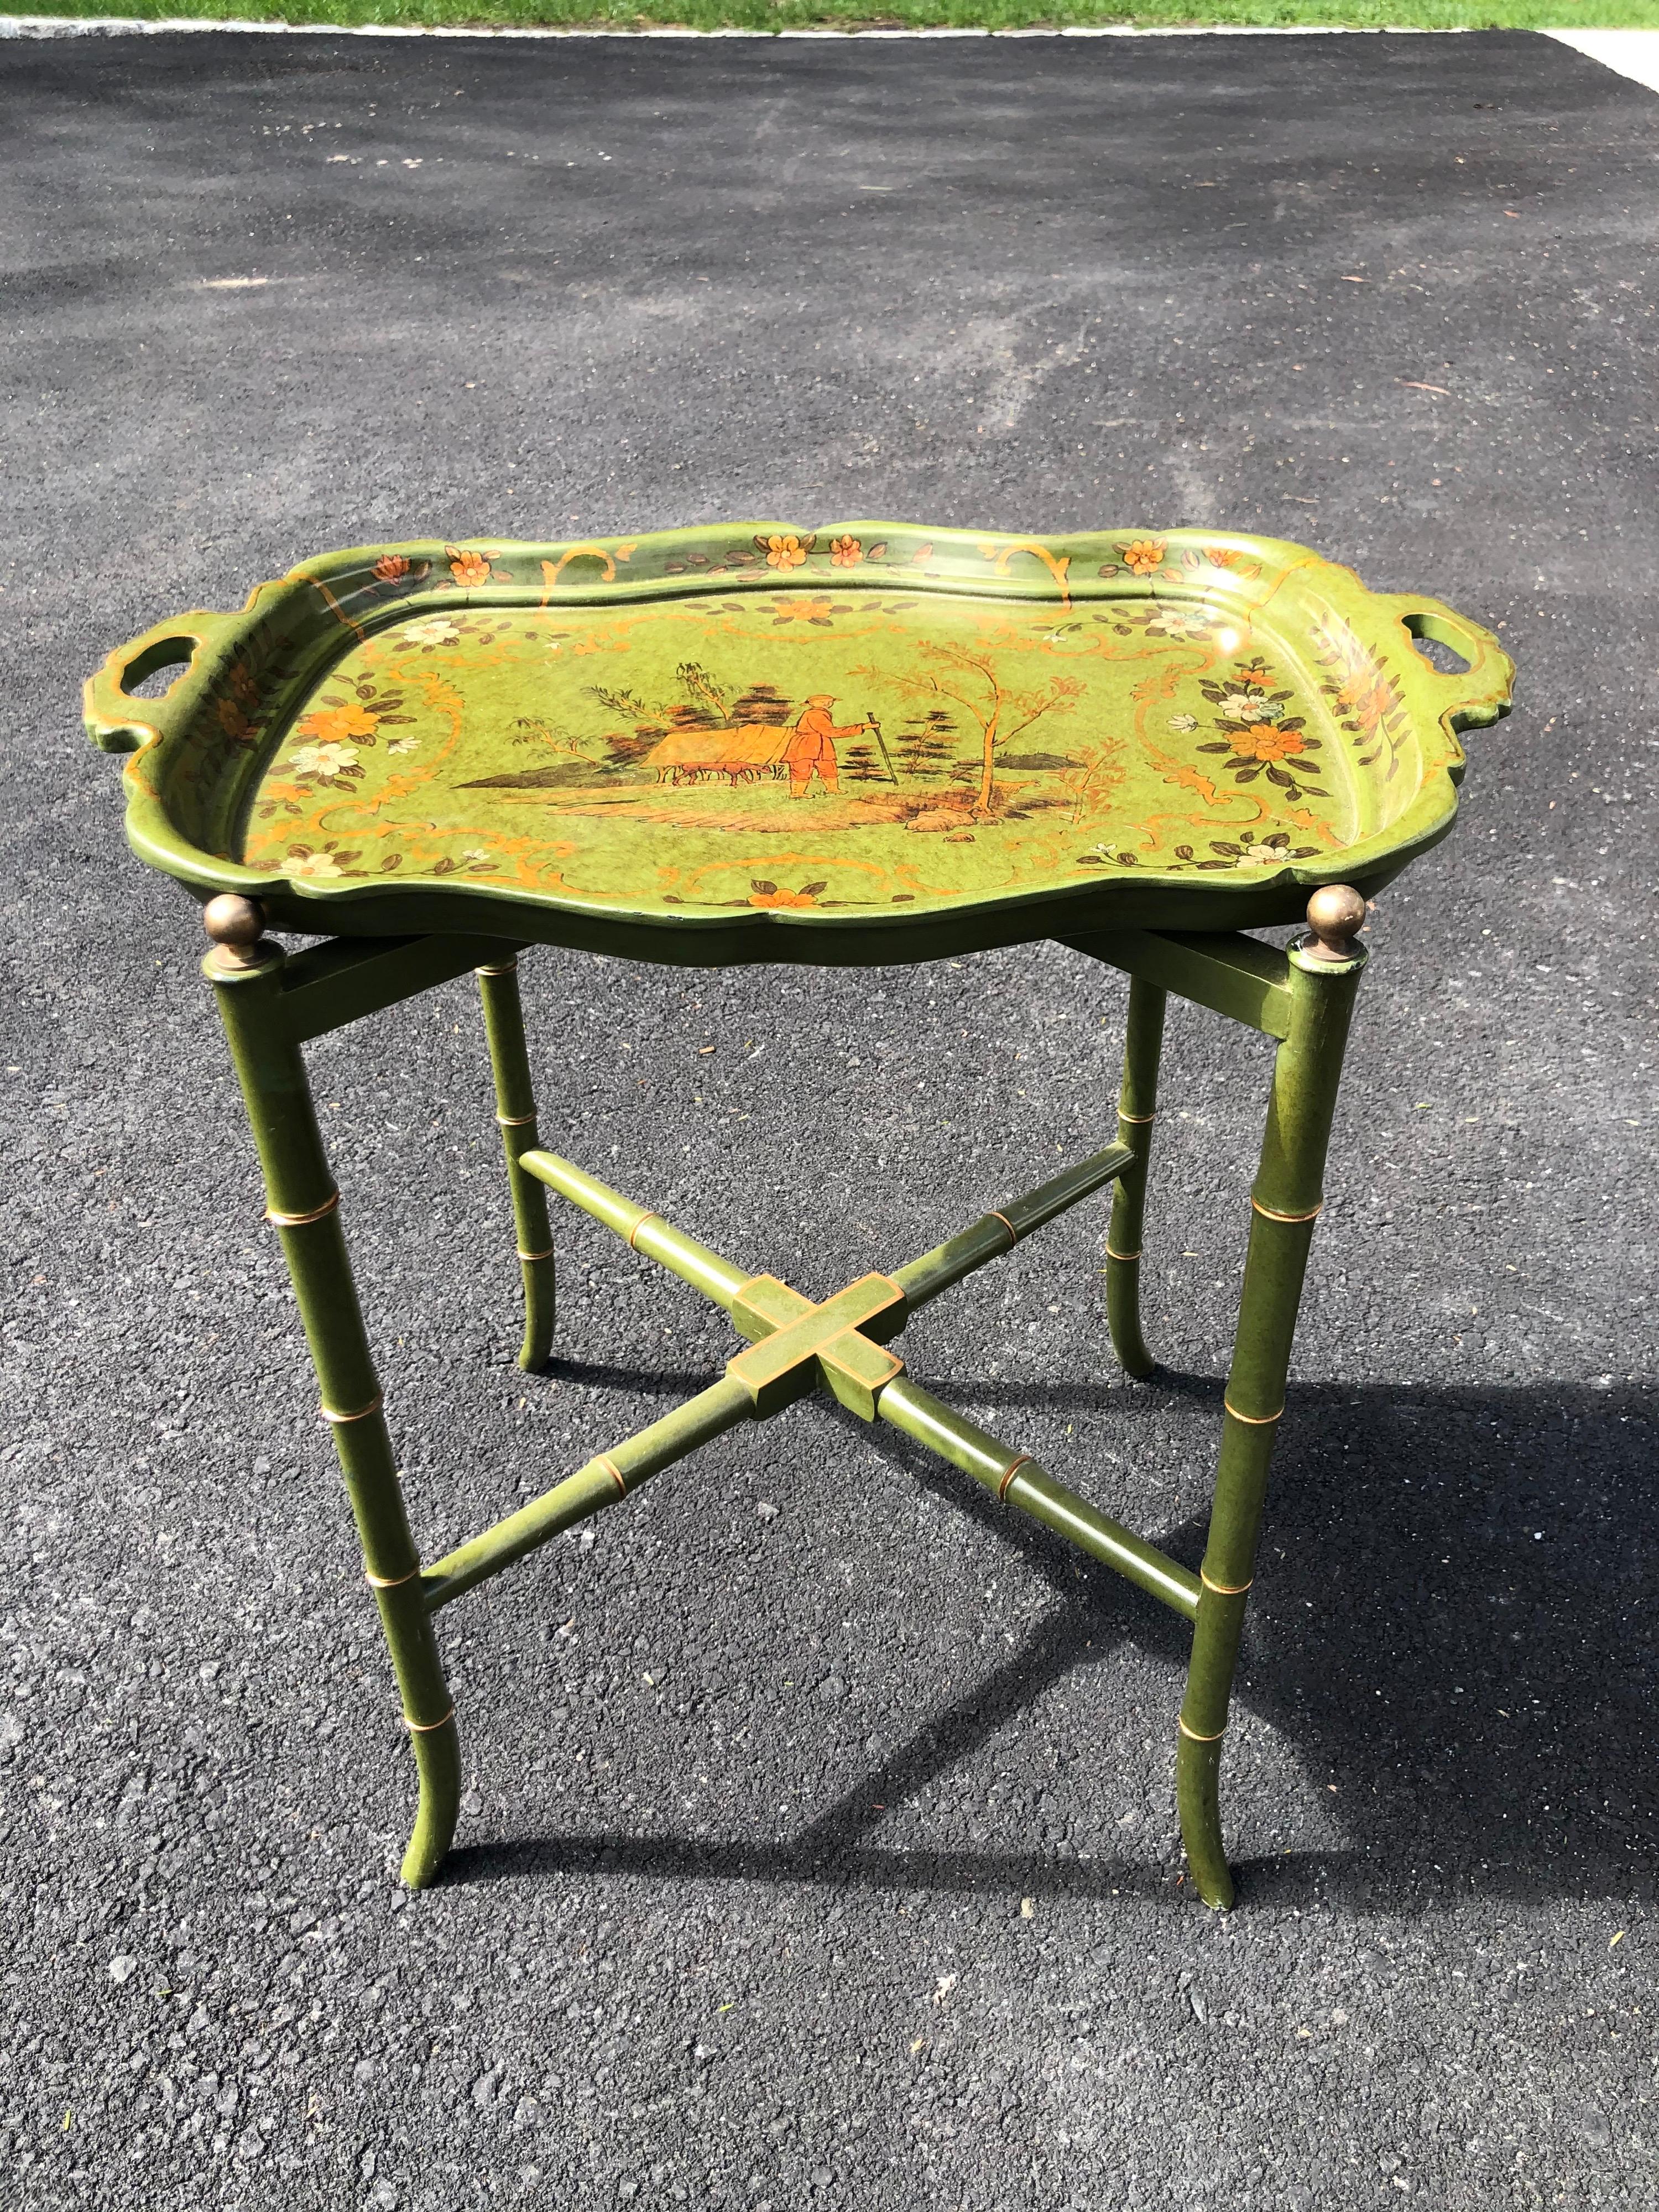 Maitland Smith style Chinoiserie tray table. Olive Green lacquered tray and stand with gold accents and Asian motifs. This item can easily parcel ship for under $100. Please provide a zip code for exact quote.